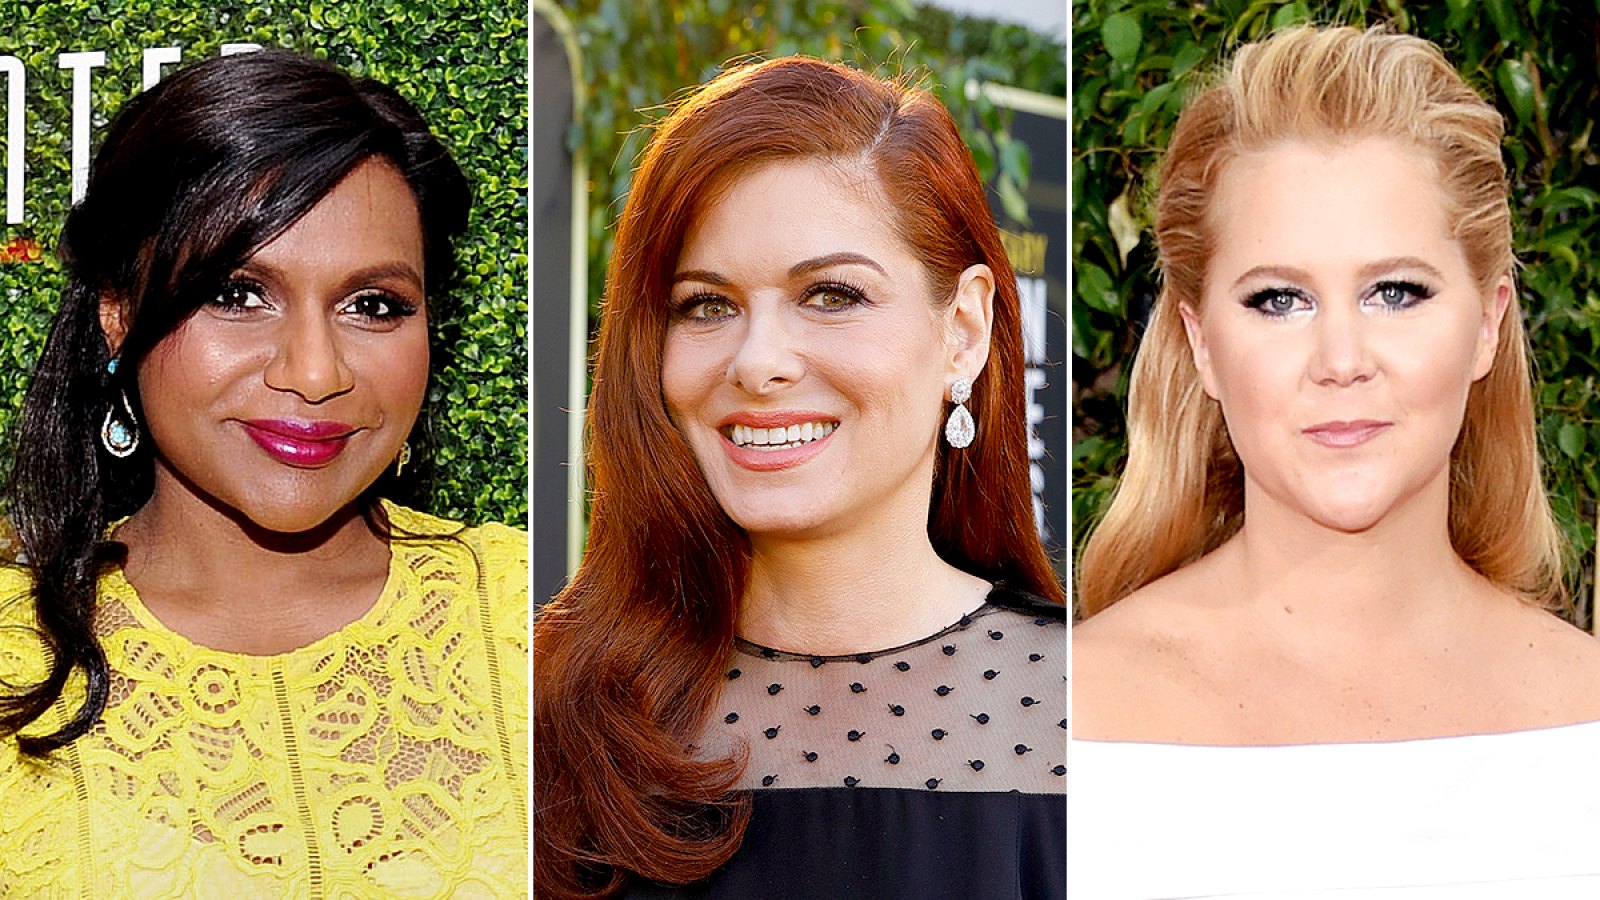 Mindy Kaling and Debra Messing congratulate Amy Schumer